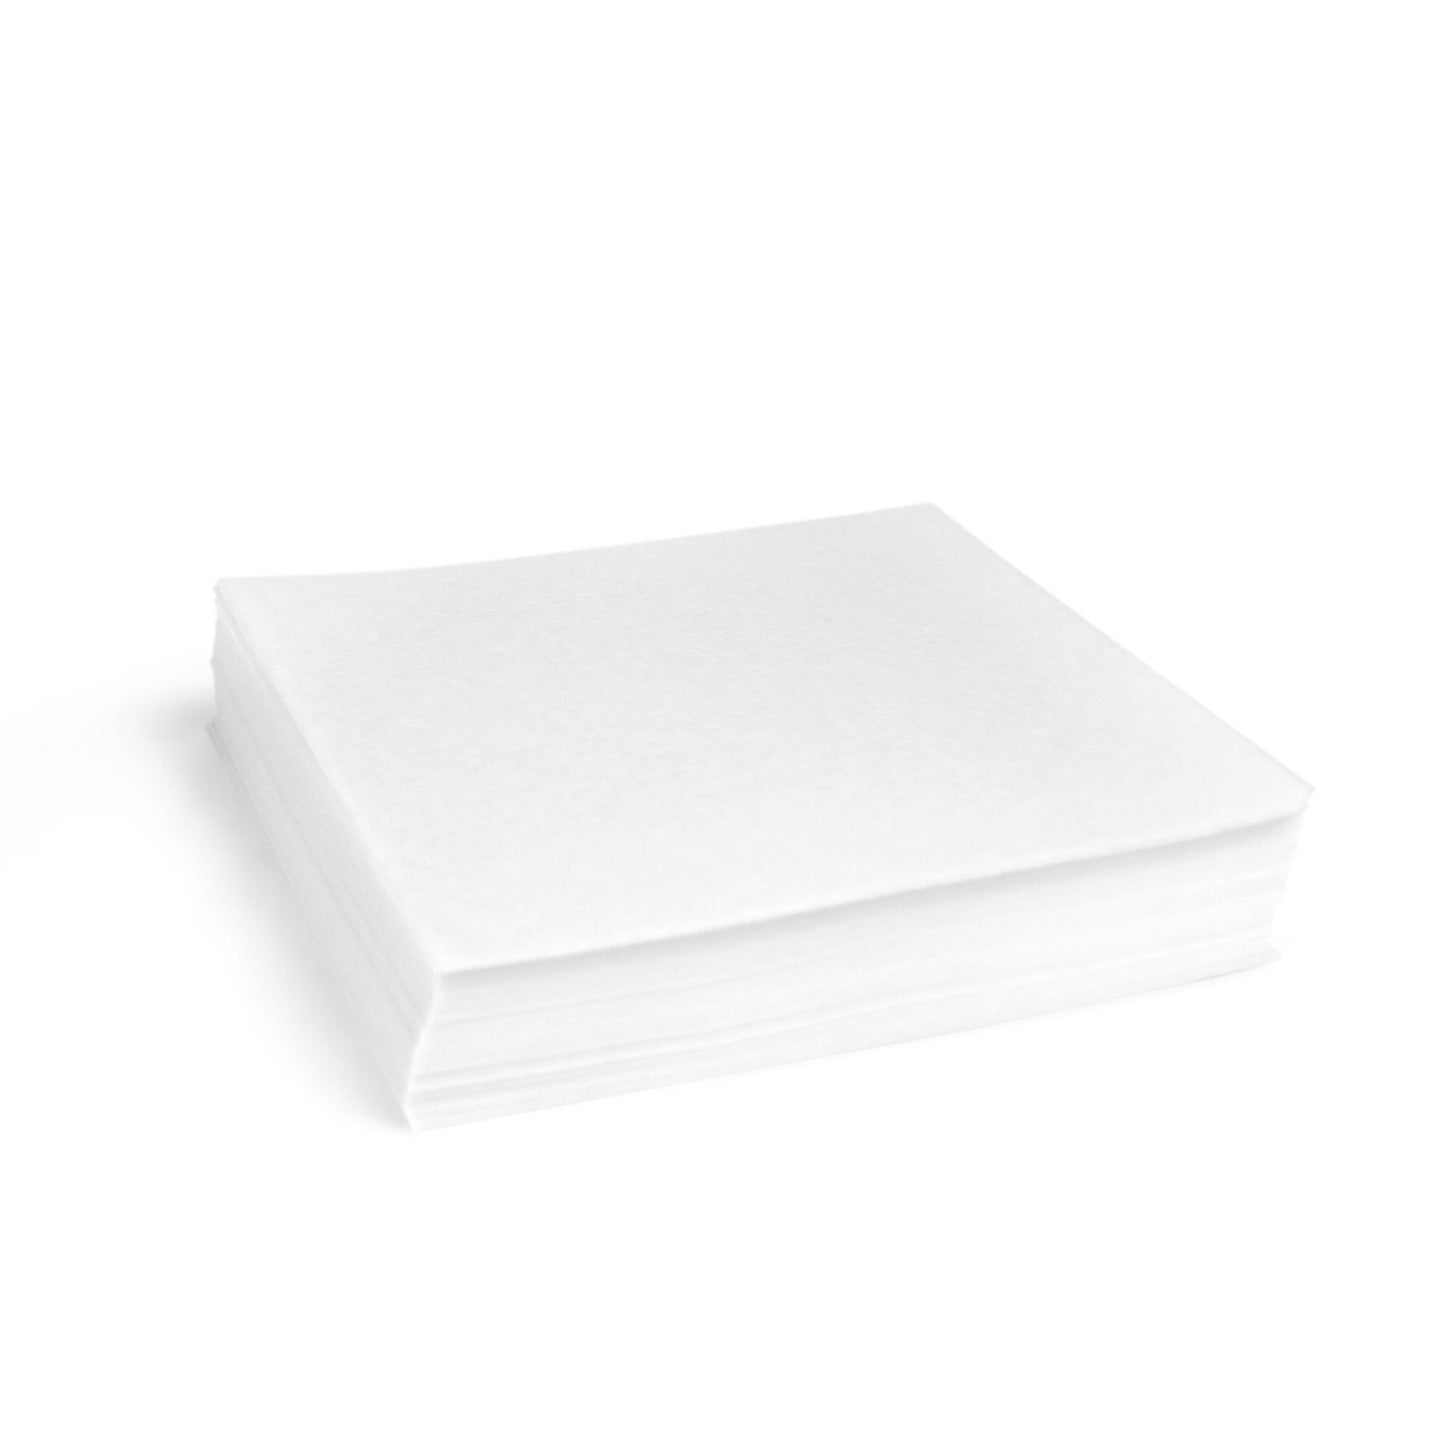 4" x 4" Parchment Paper Sheets - Silicone Coated - 1000 COUNT